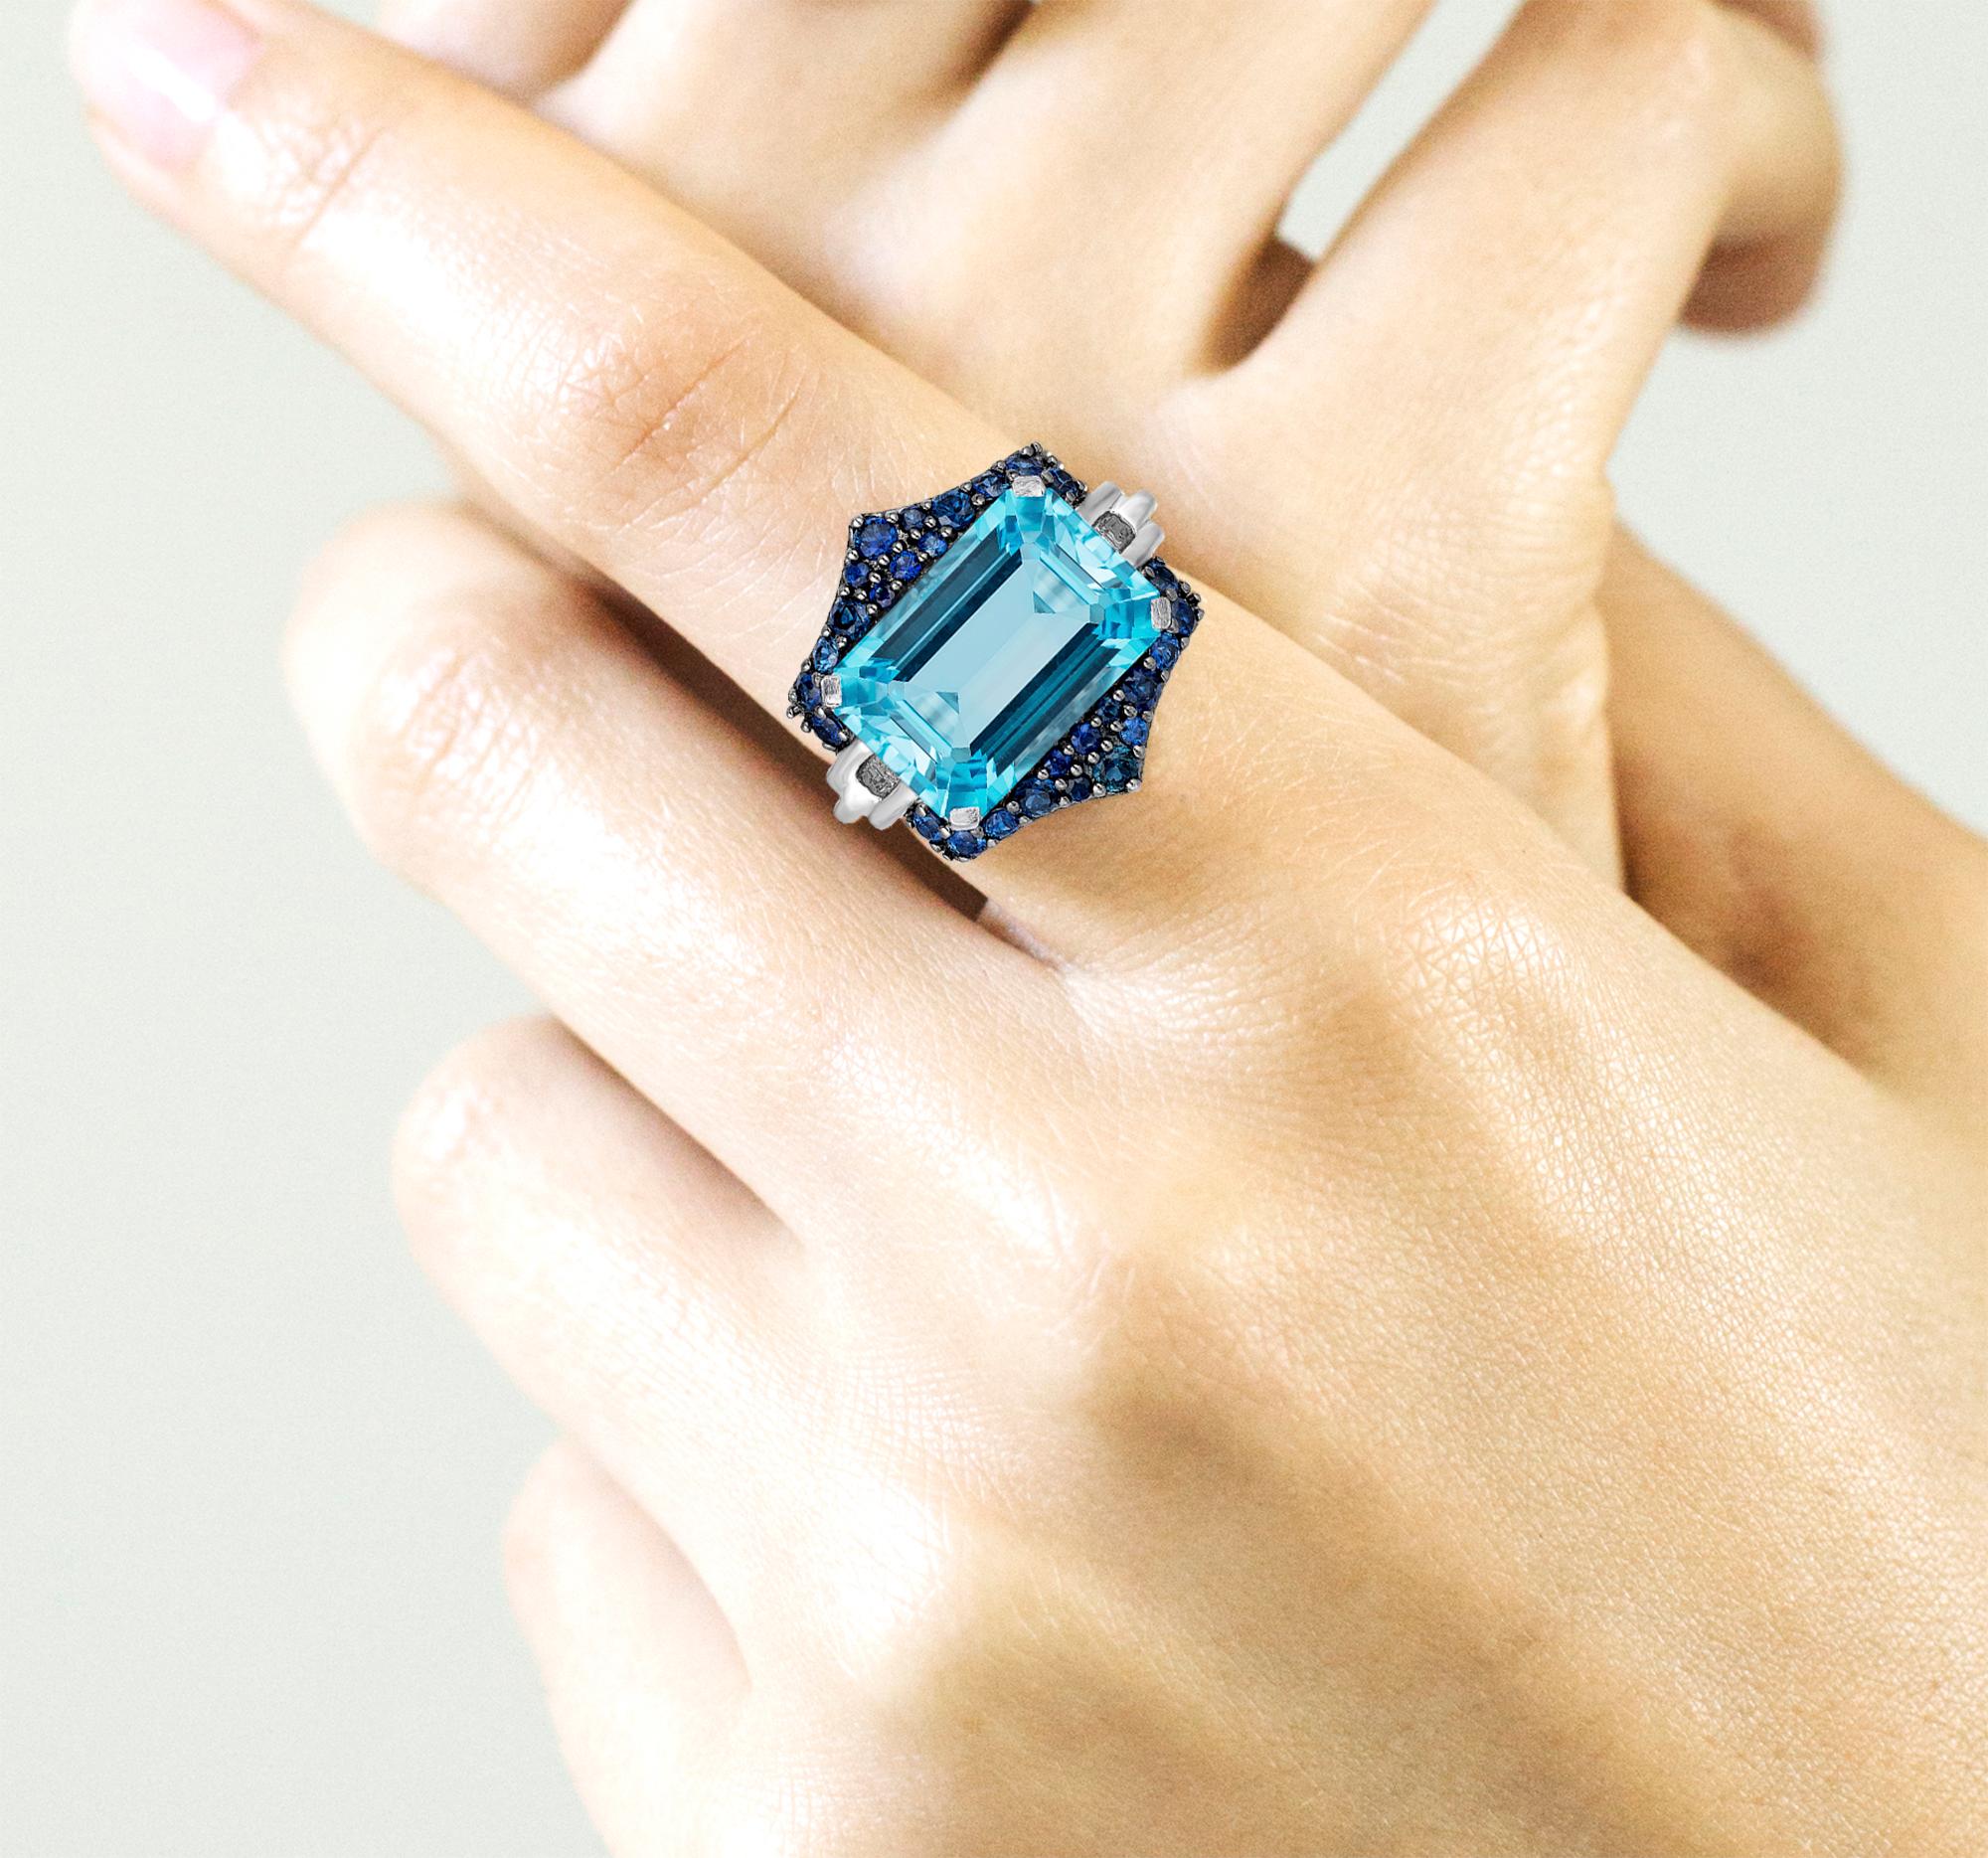 Blue Topaz and Blue Sapphire Ring in 18K White Gold, form 'Rain-Forest' Collection. This collection is thriving with luxuriant center stones and colored pave that represent the rain and the forest together. Blue for water, green for the forest,